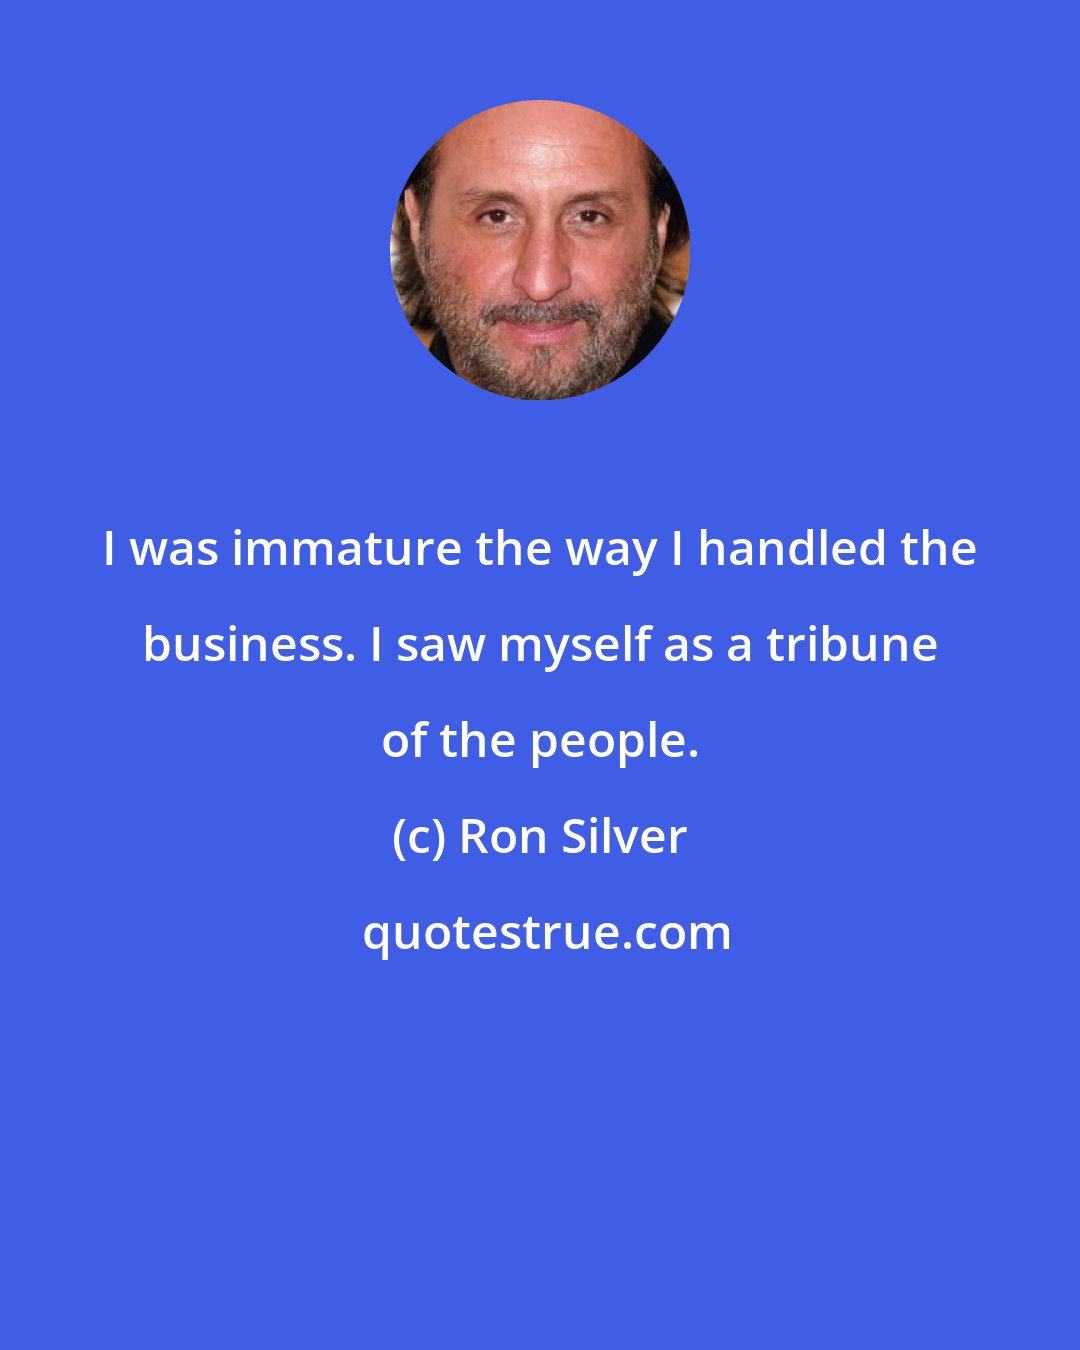 Ron Silver: I was immature the way I handled the business. I saw myself as a tribune of the people.